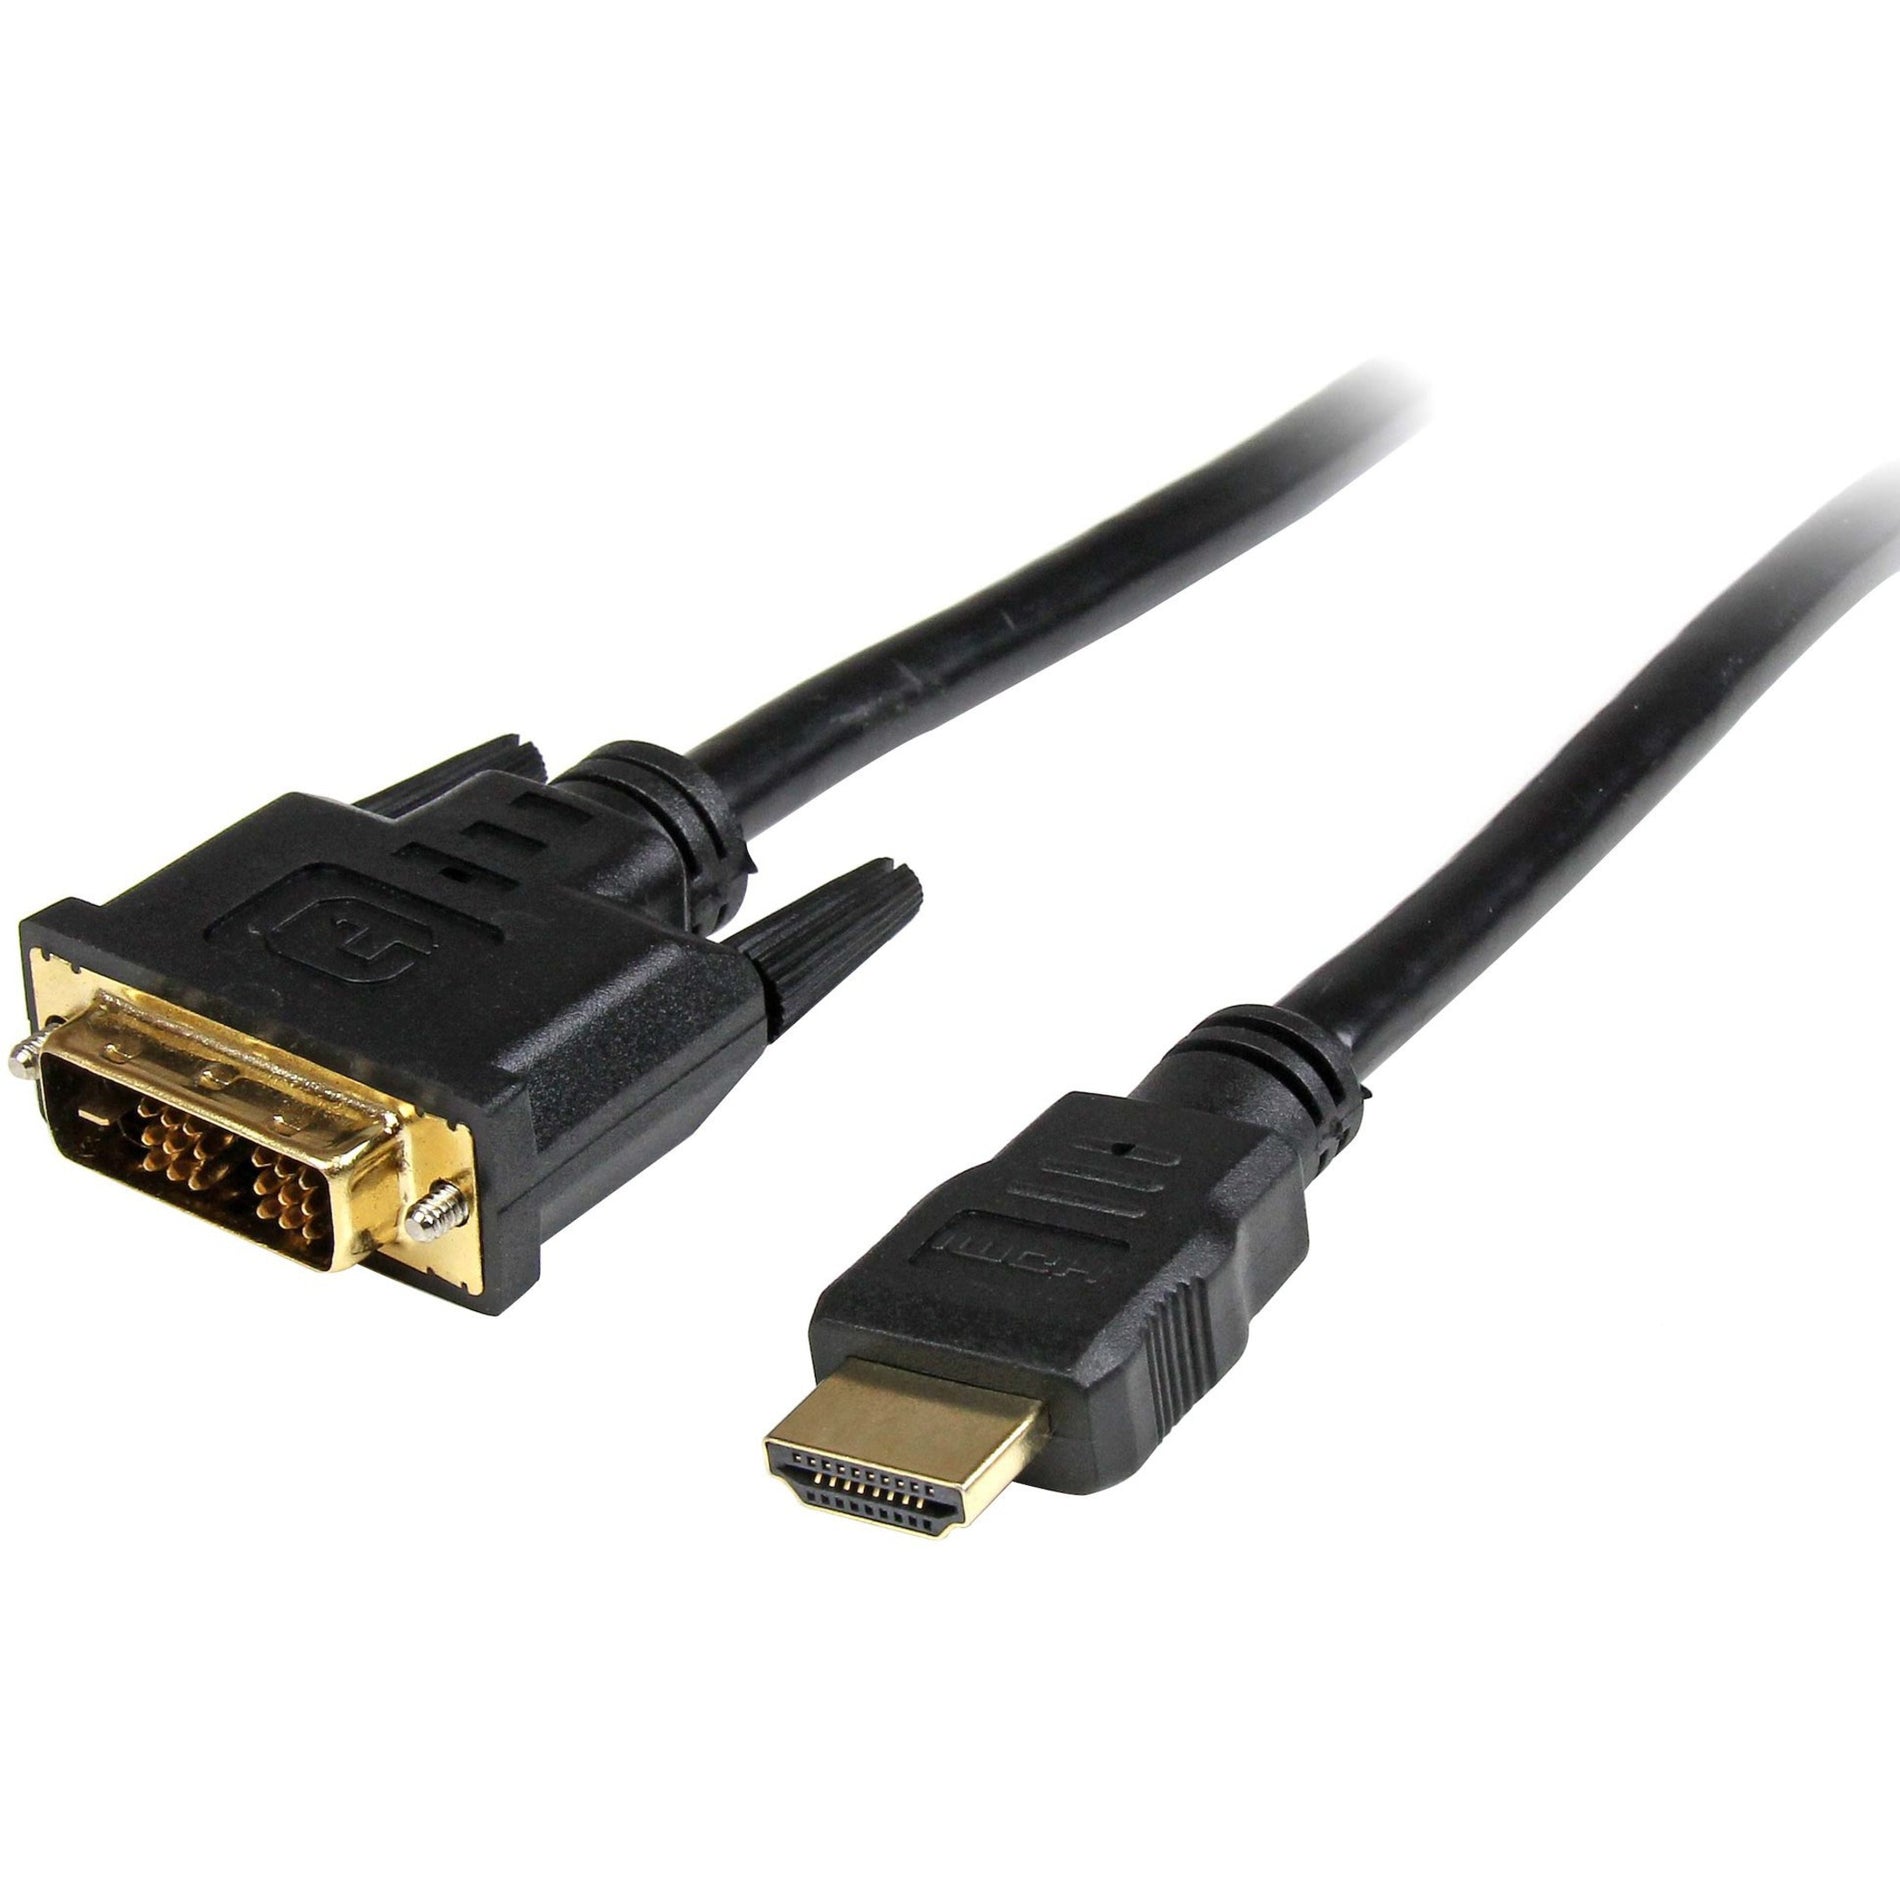 StarTech.com HDMIDVIMM15 15 ft HDMI to DVI-D Cable - M/M, Video Cable Adapter